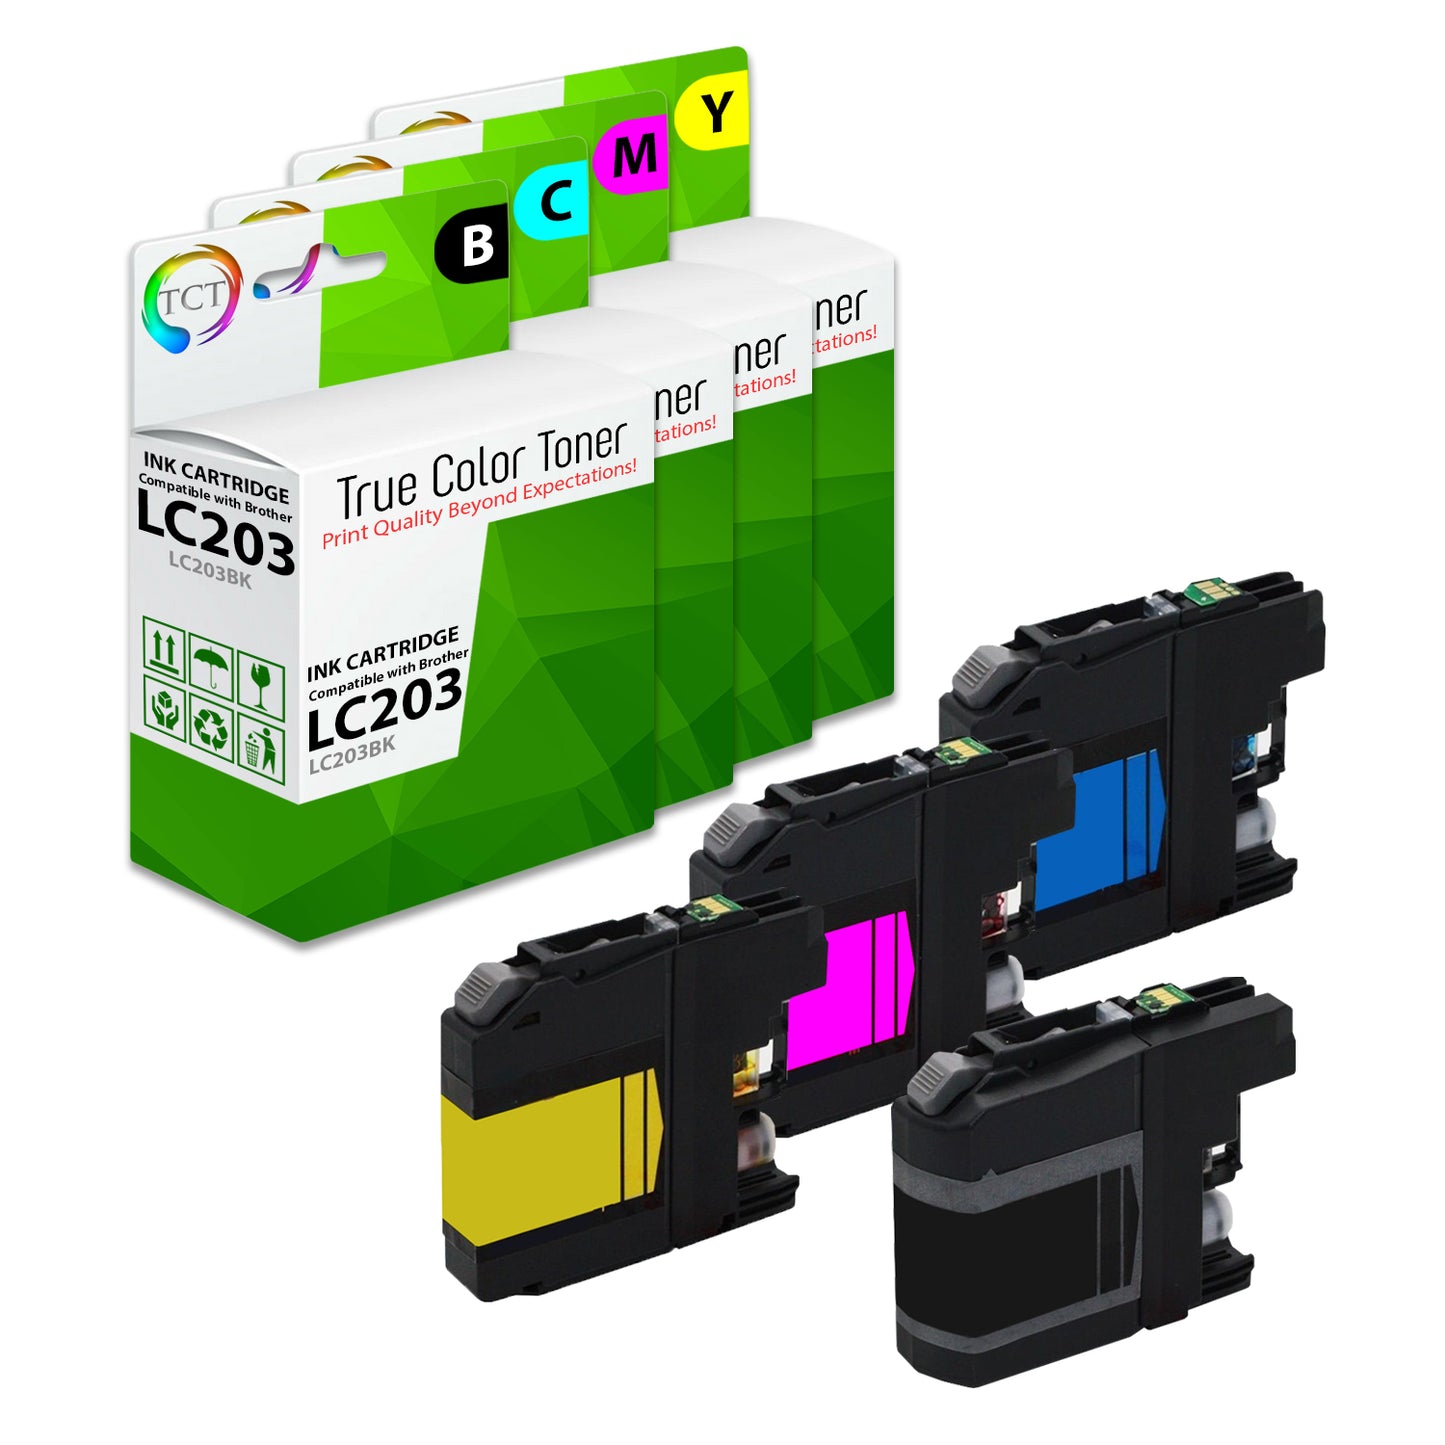 TCT Compatible Ink Cartridge Replacement for the Brother LC203 Series - 4 Pack (B, C, M, Y)